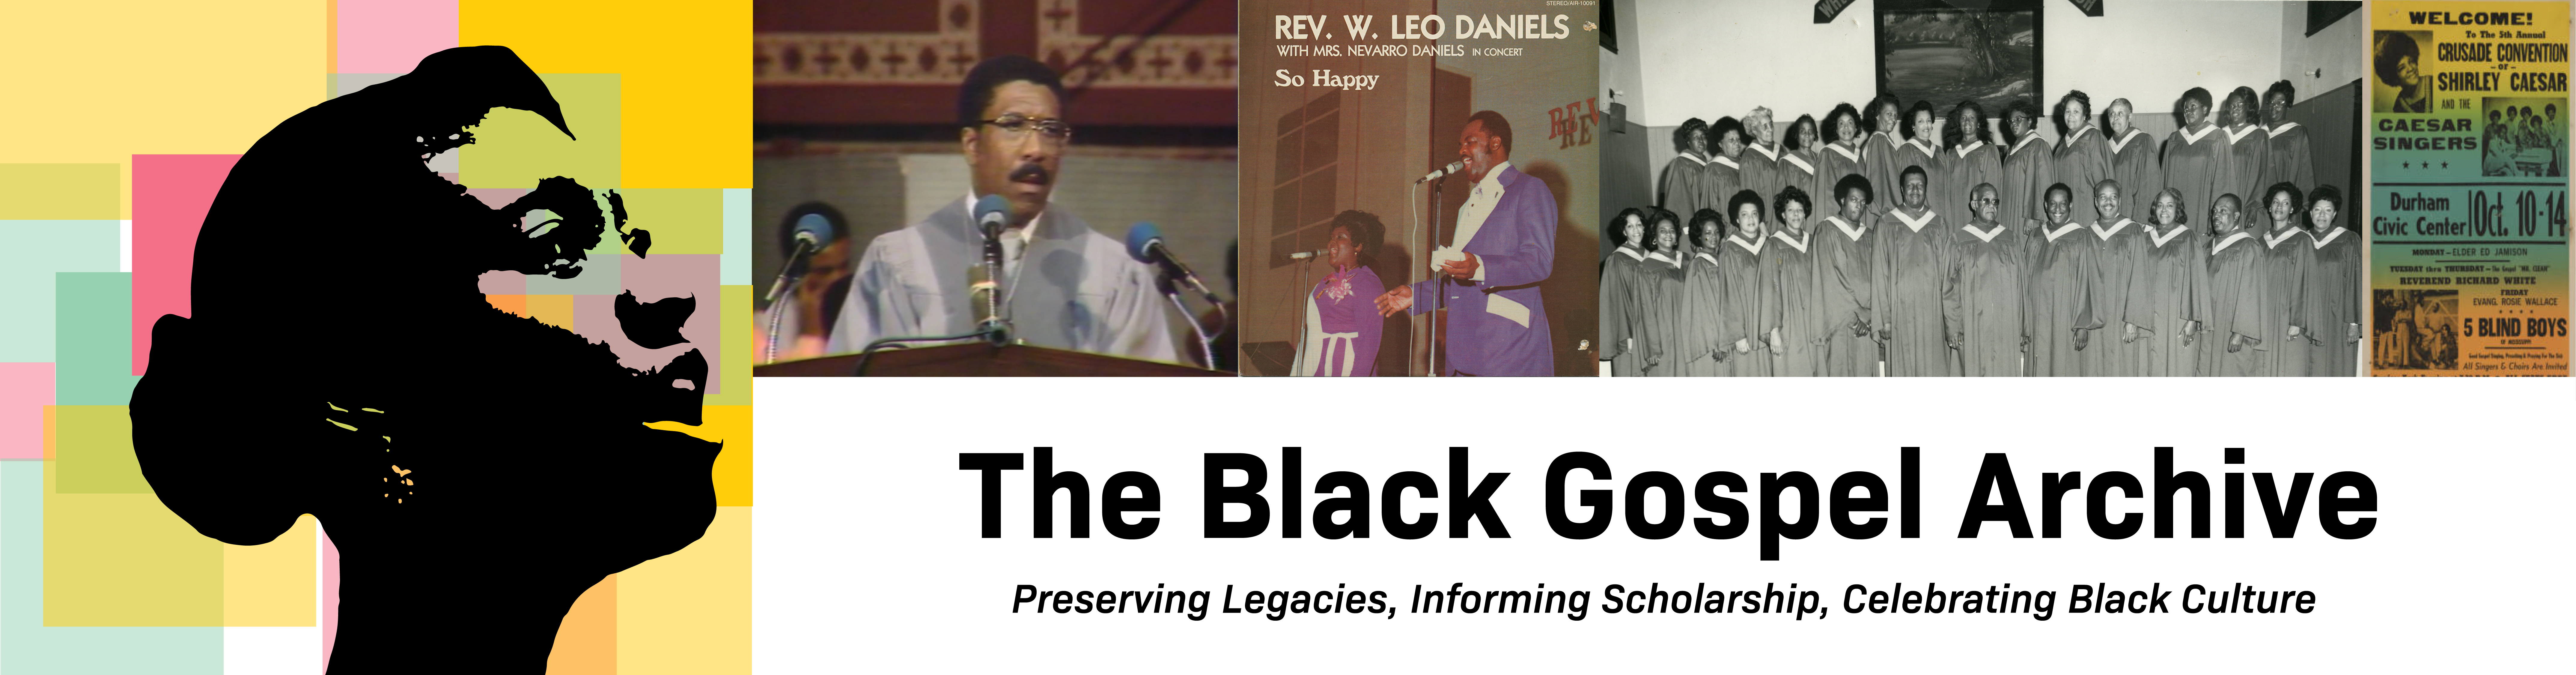 Black Gospel Archive banner, featuring faces of prominent contributors to the culture